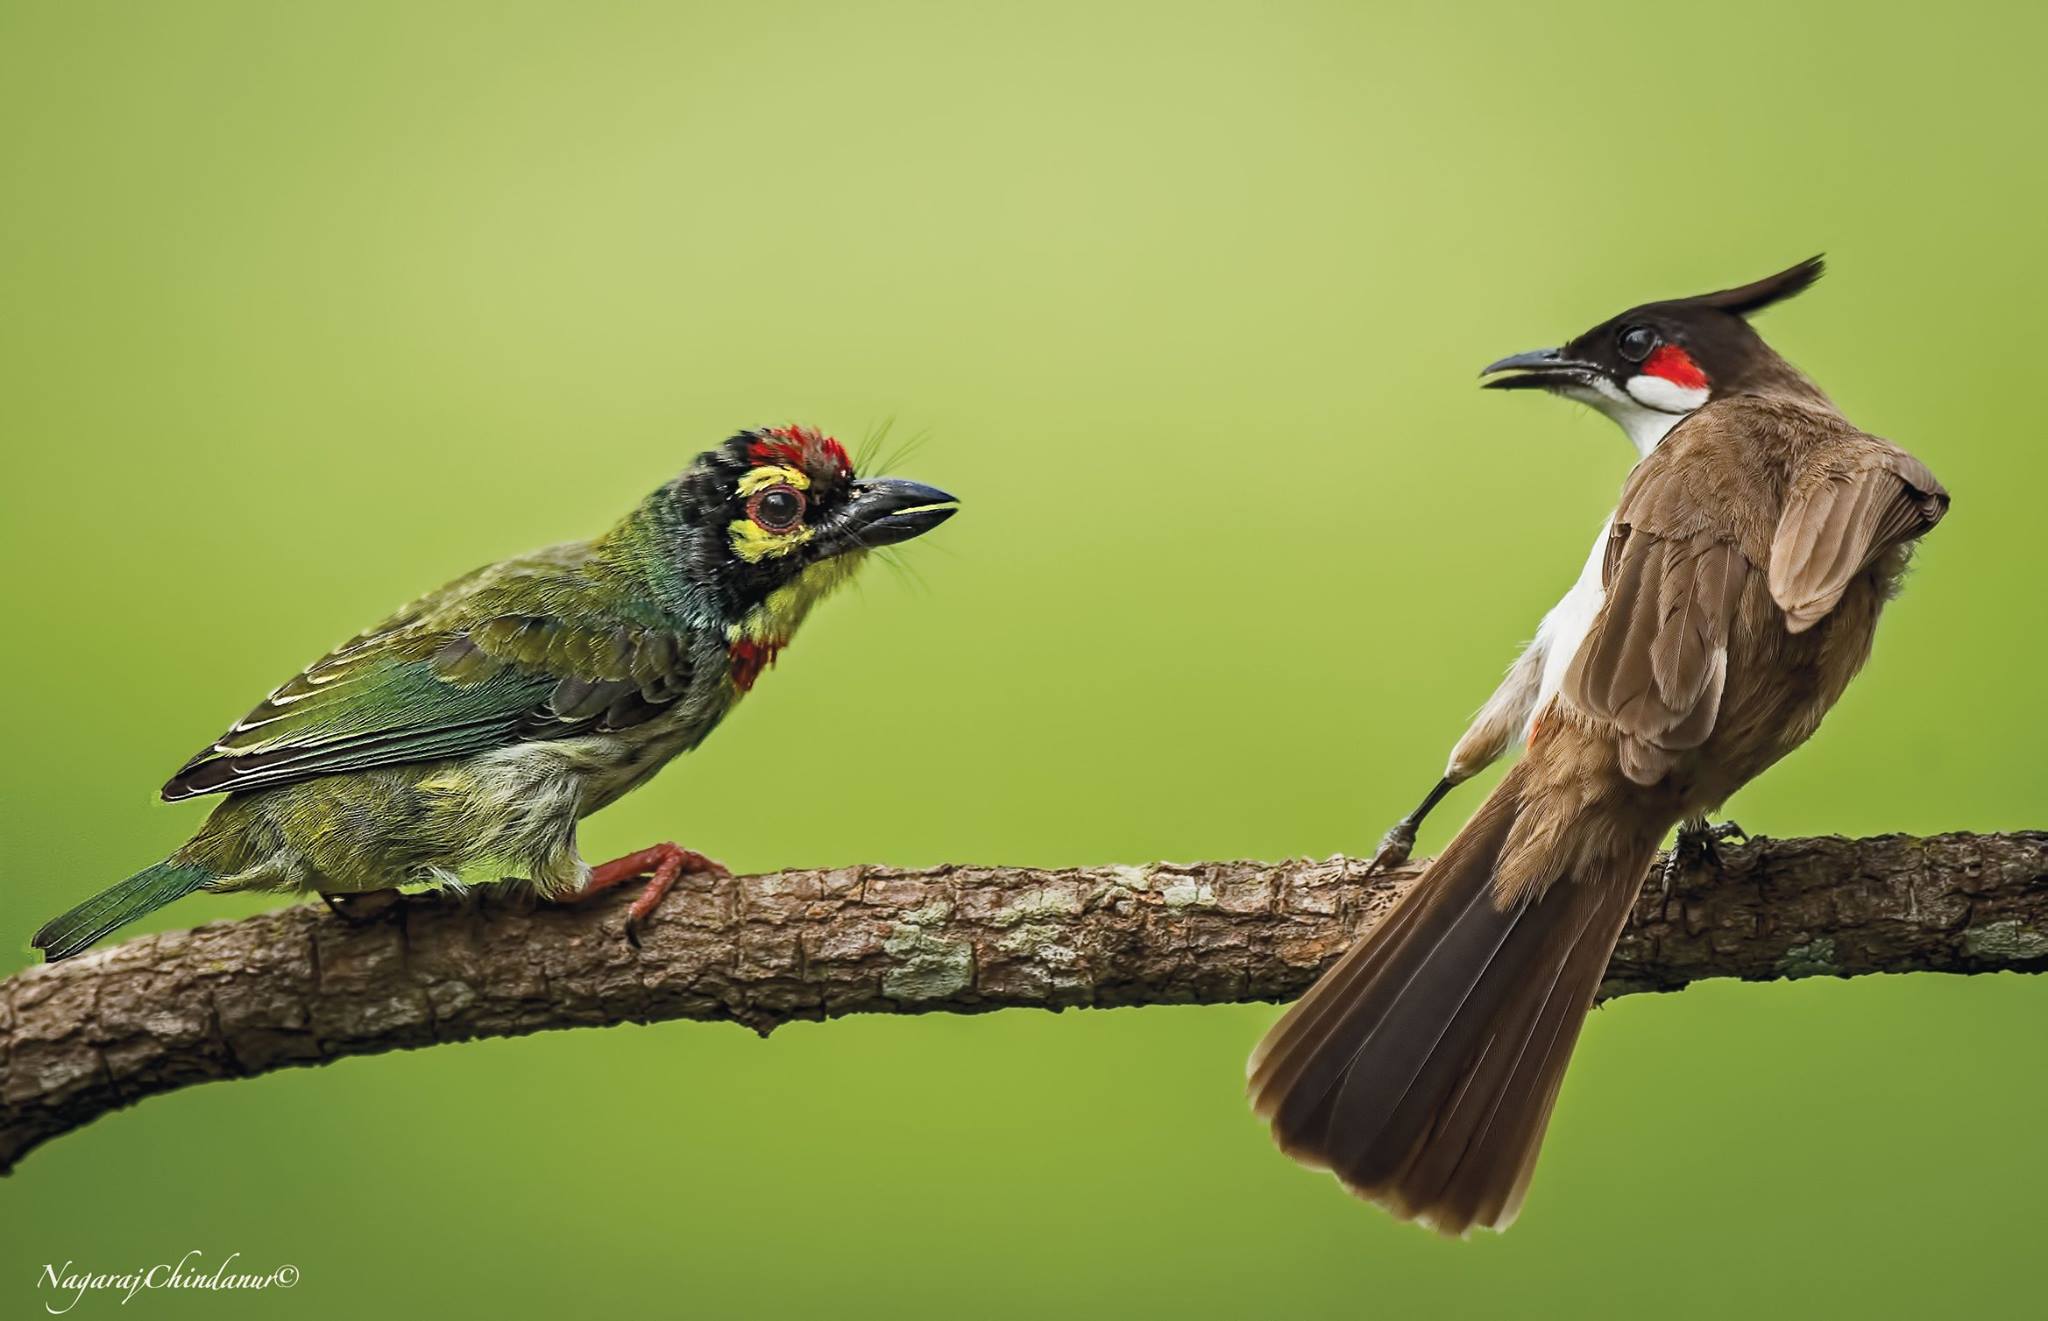 Top 25 Wild Bird Photographs of the Week #93 – National Geographic Blog